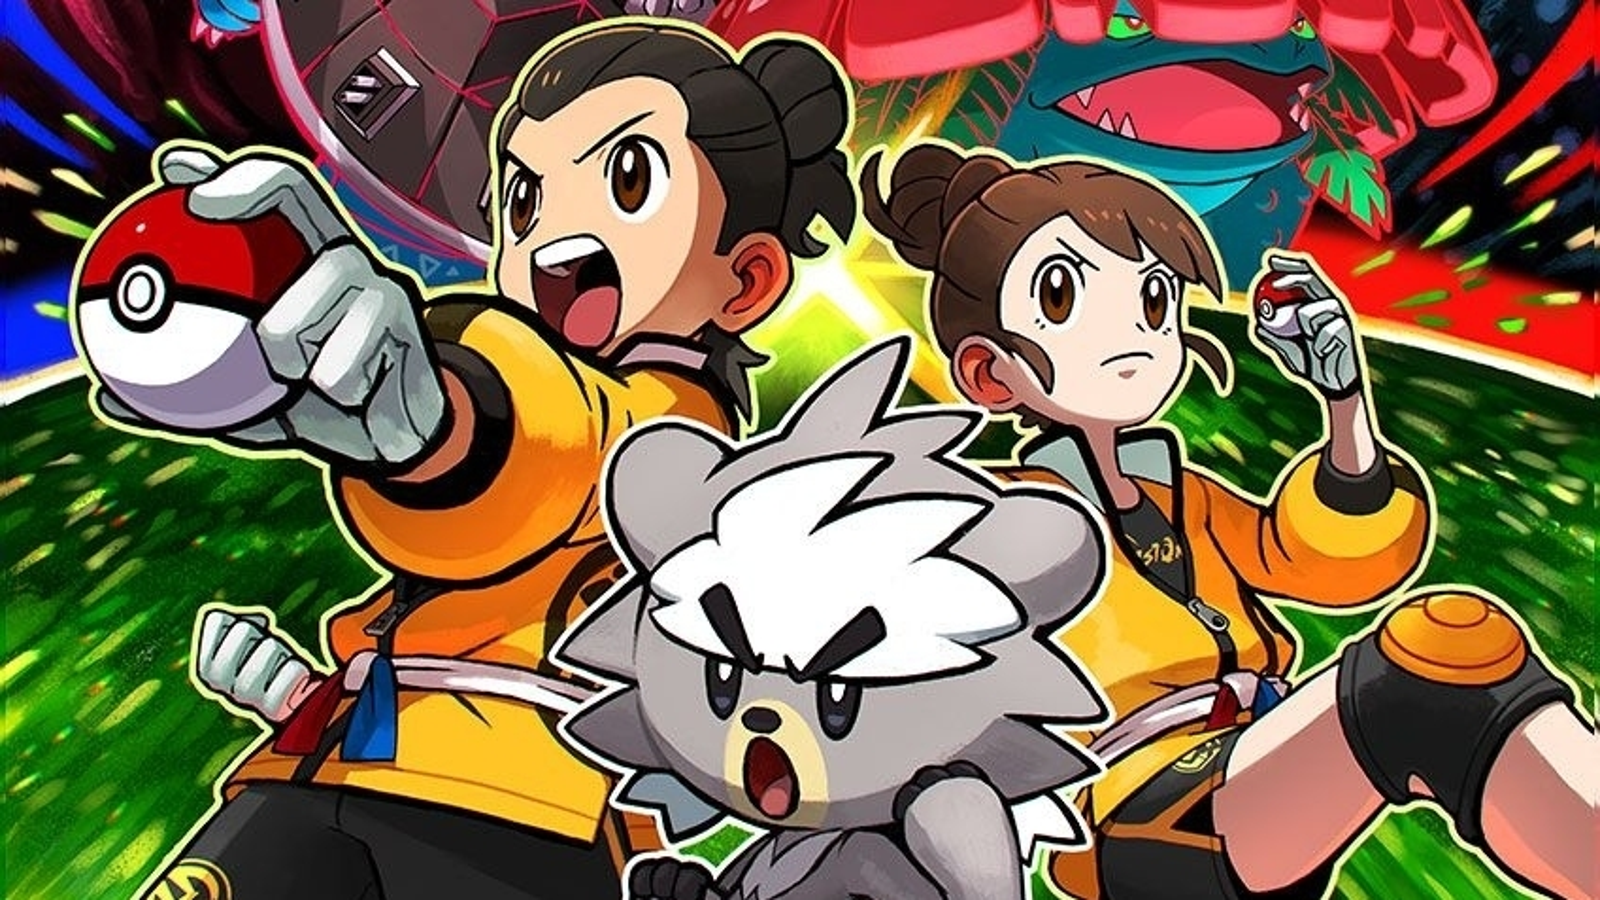 Pokemon Sword and Shield hands-on preview at E3 2019